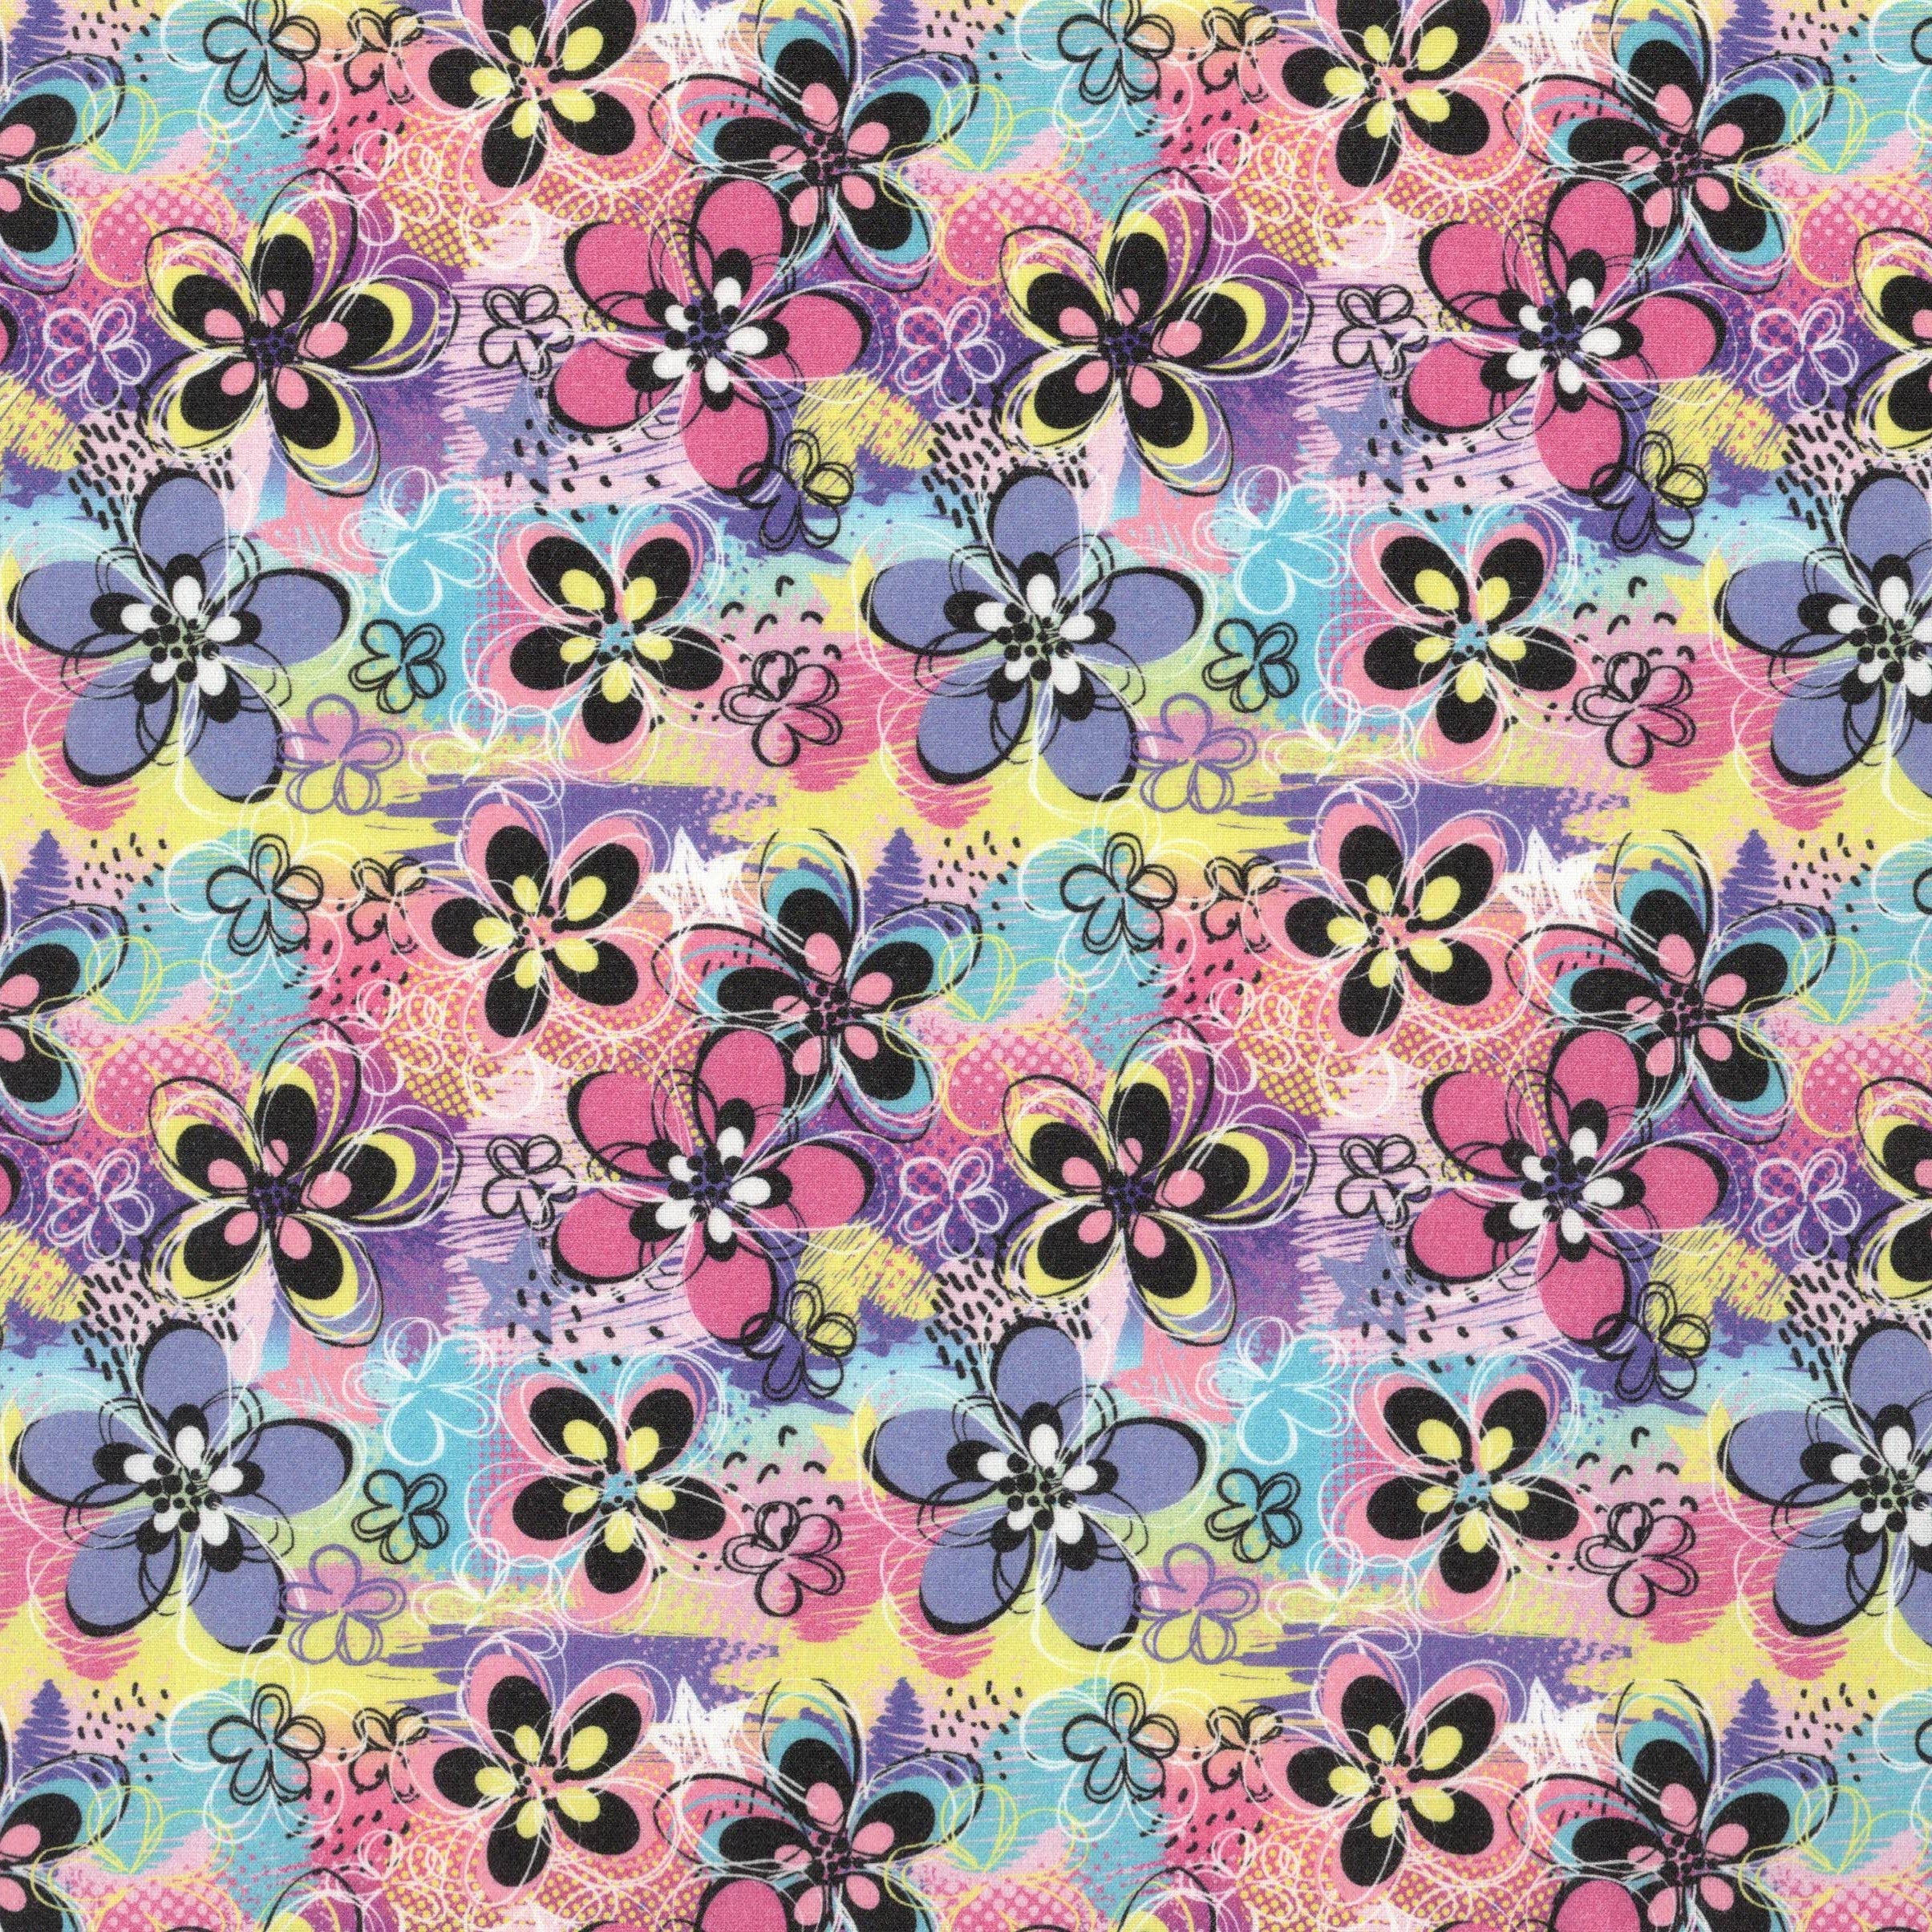 PRE-ORDER Quirky Cotton Abstract Geometric Pattern Floral Multi-Coloured (PRE-ORDER QC Urban Flowers)